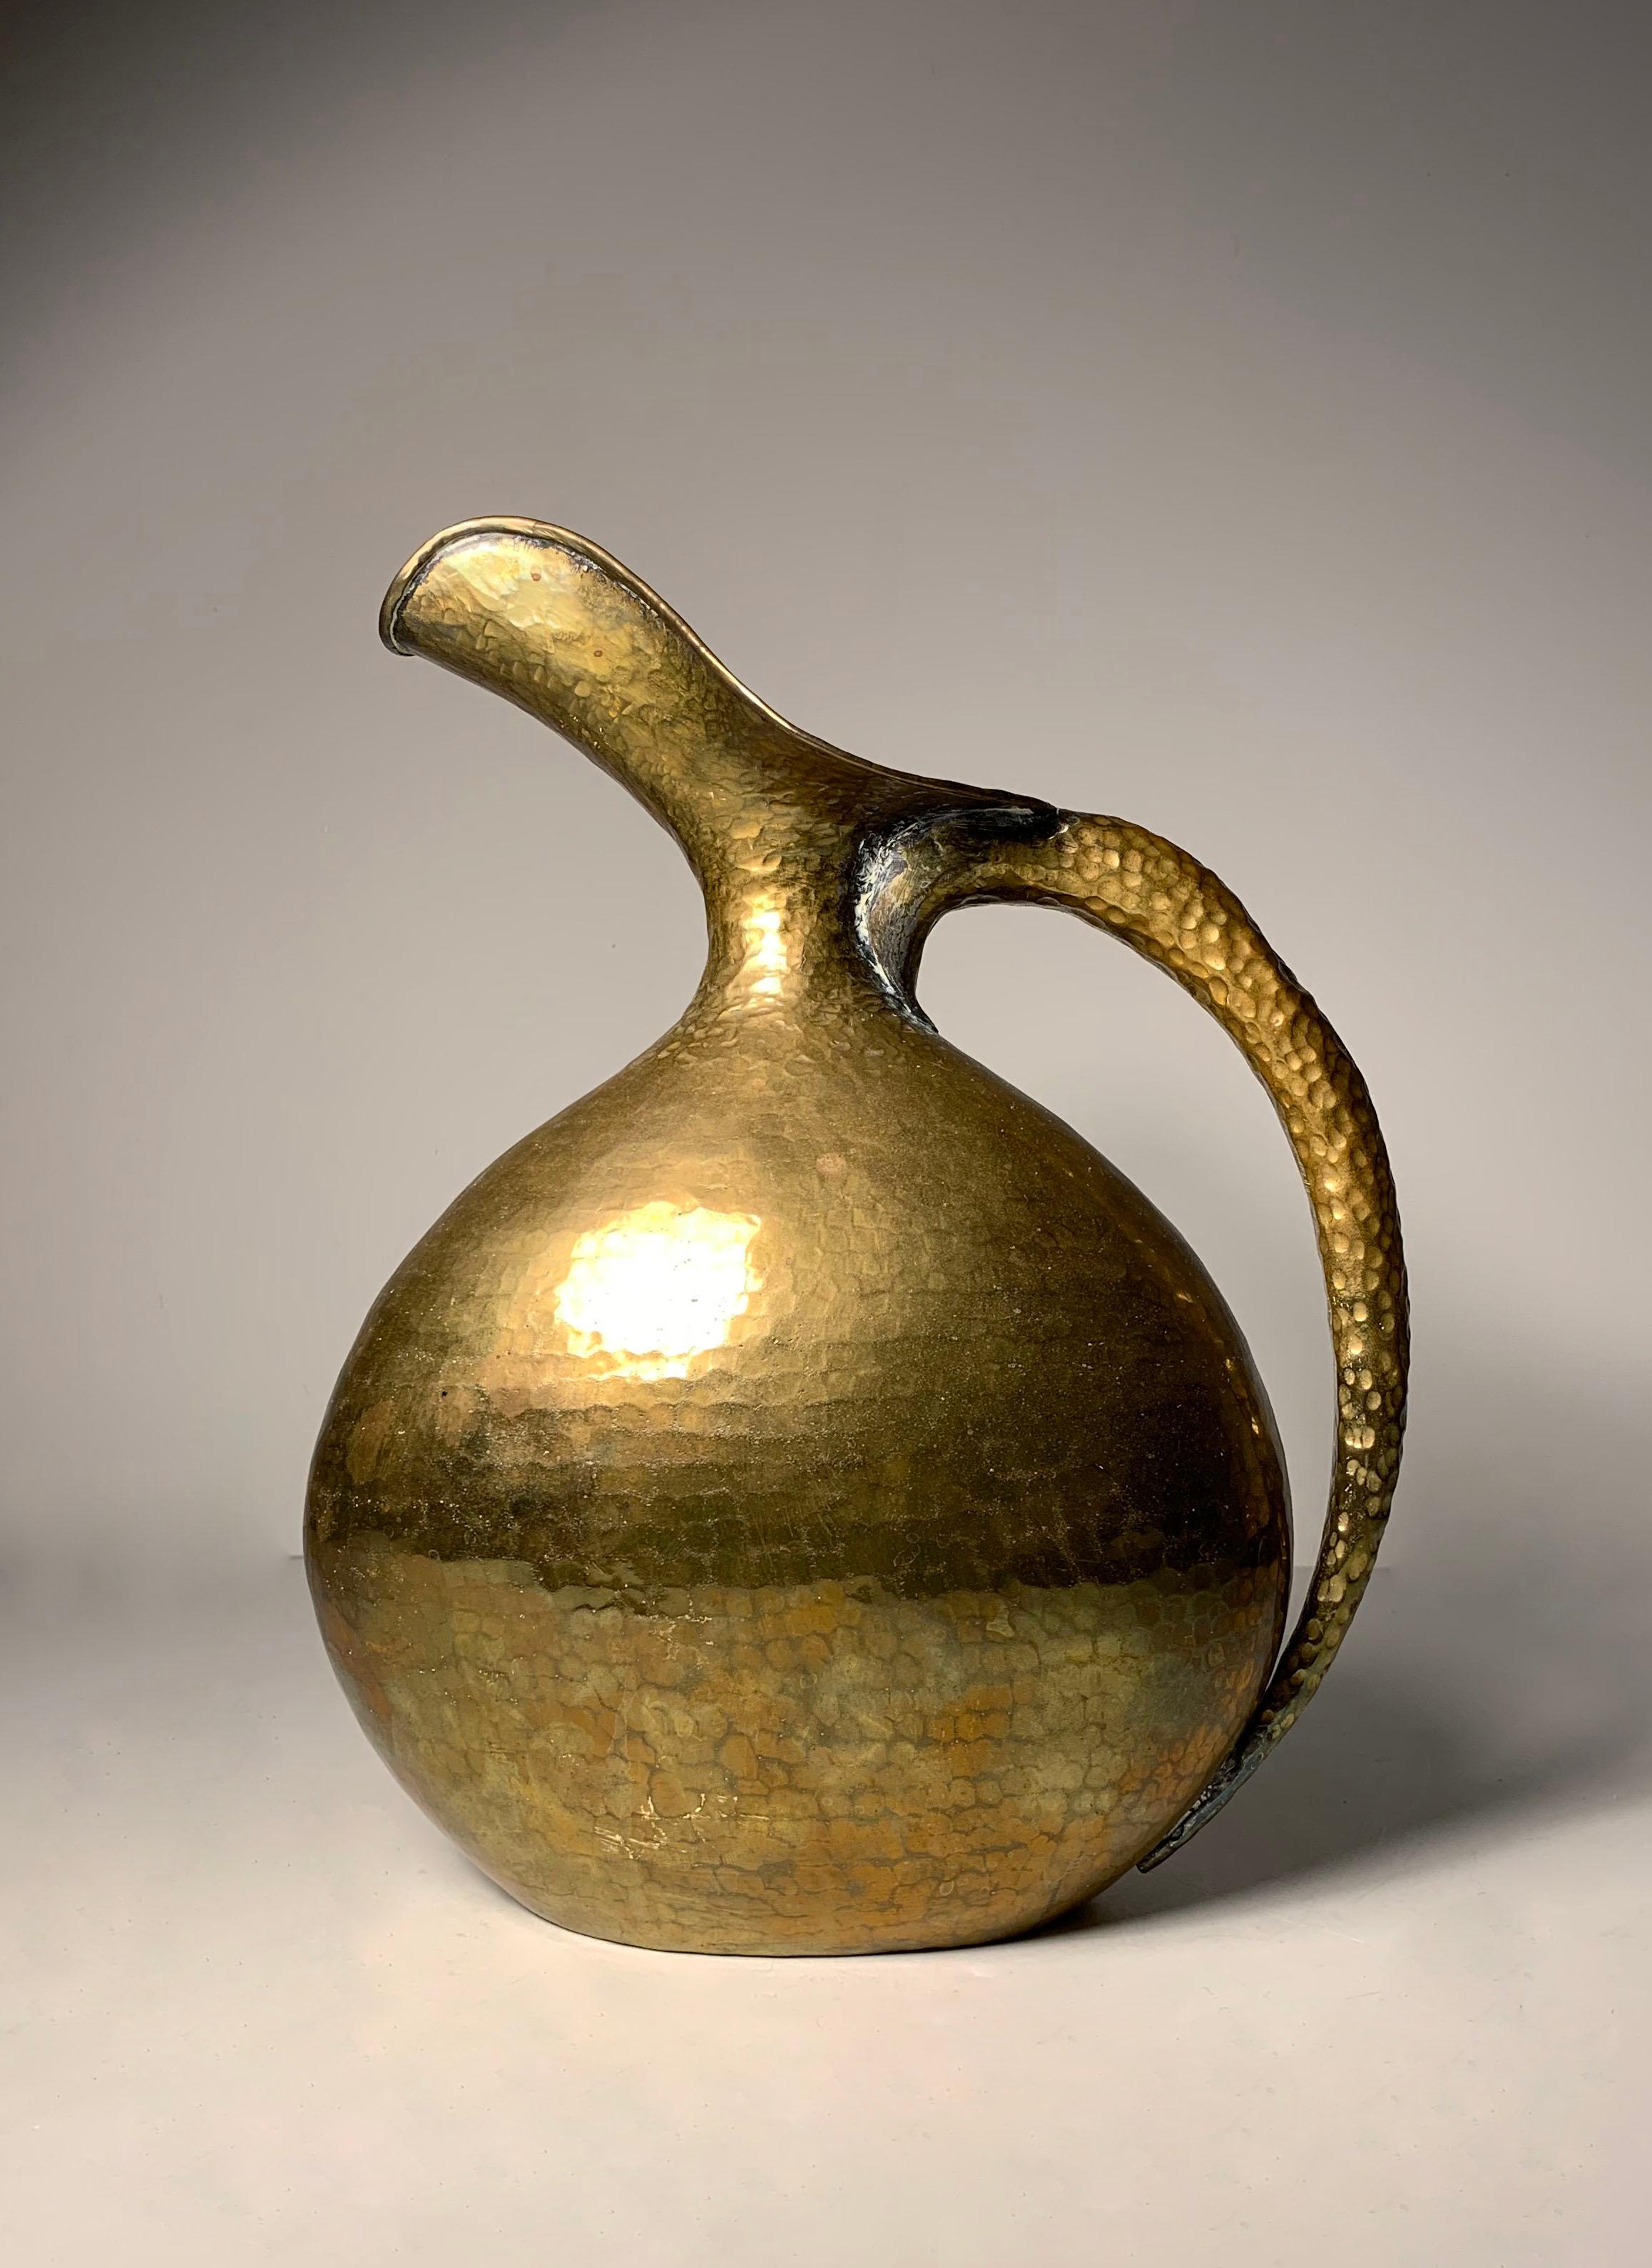 Italian Egidio casagrande hammered brass pitcher

One impact spot on the handle as shown. Otherwise, quite beautiful condition.